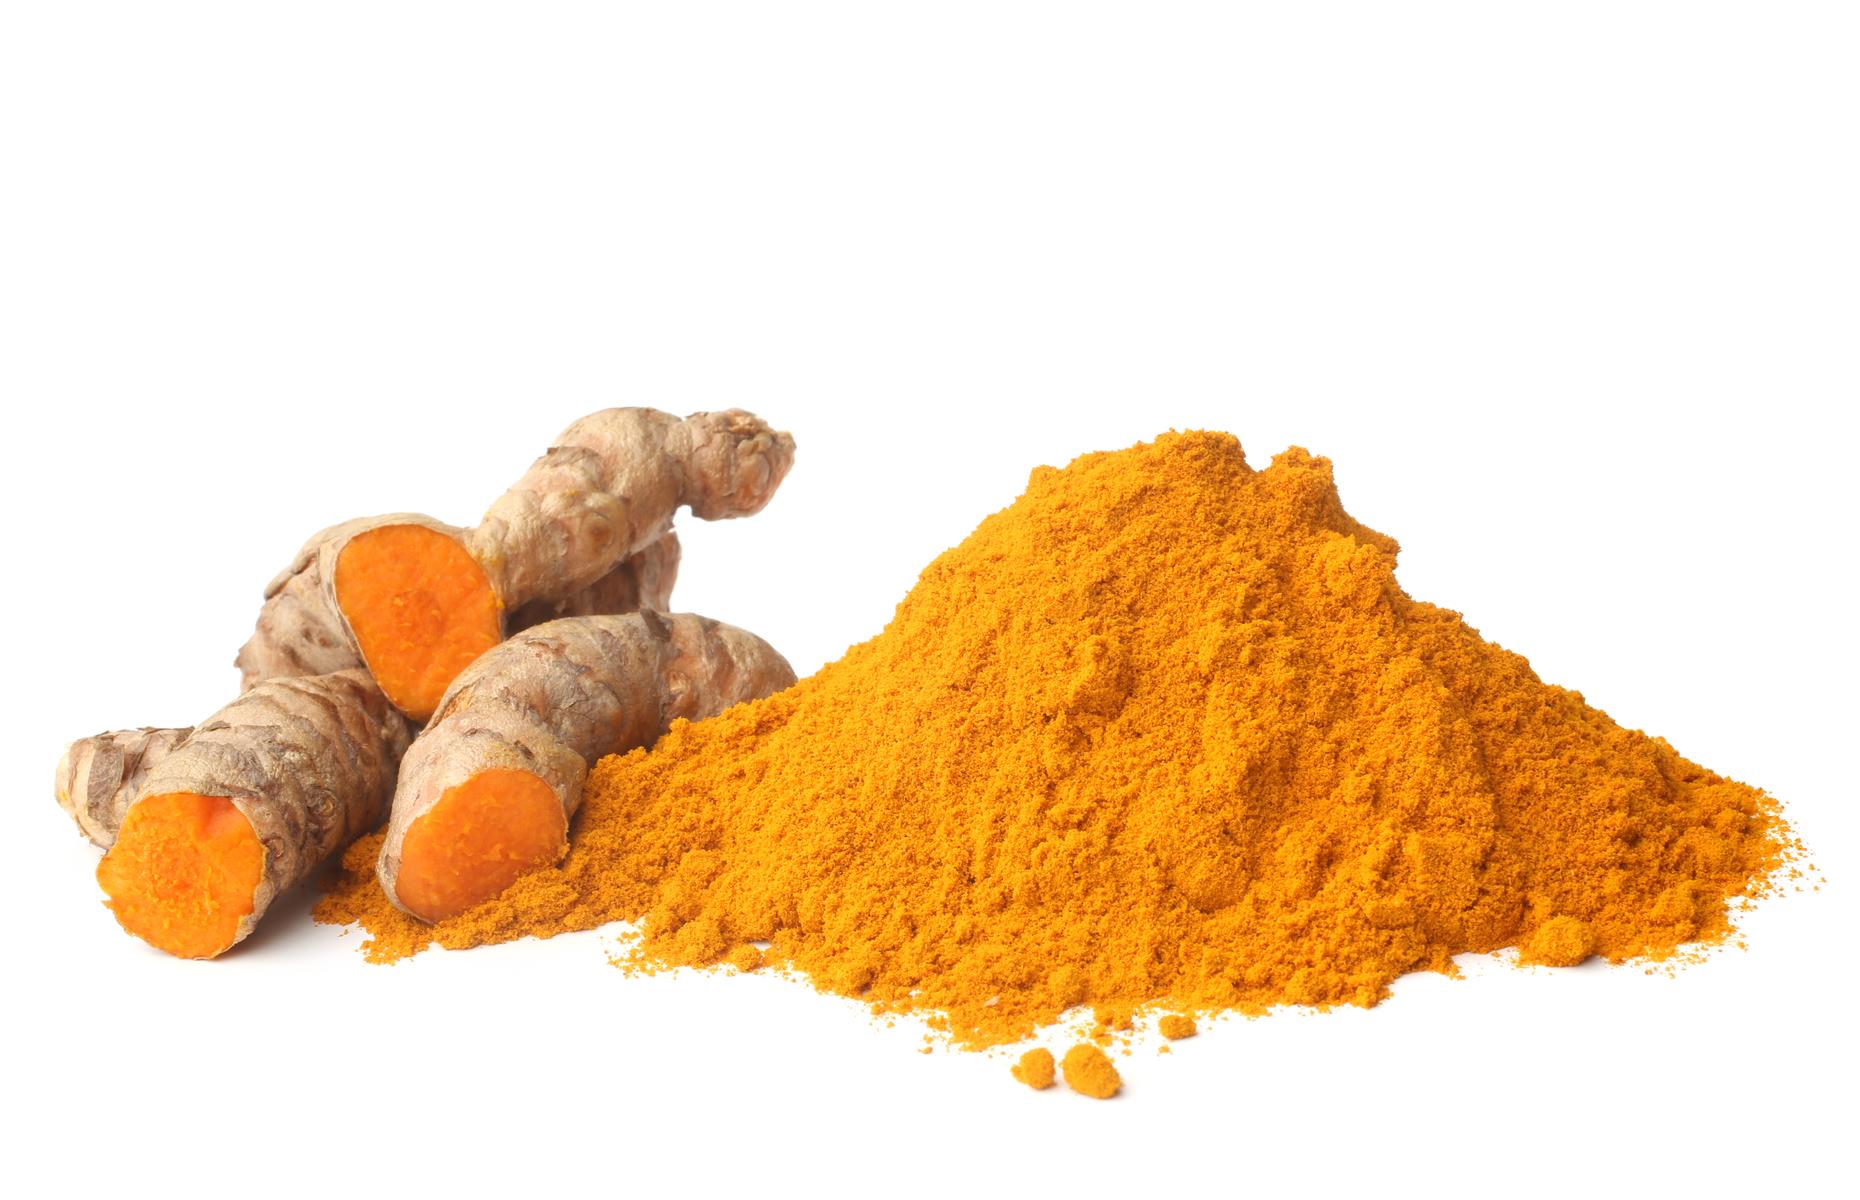 India makes millions from turmeric